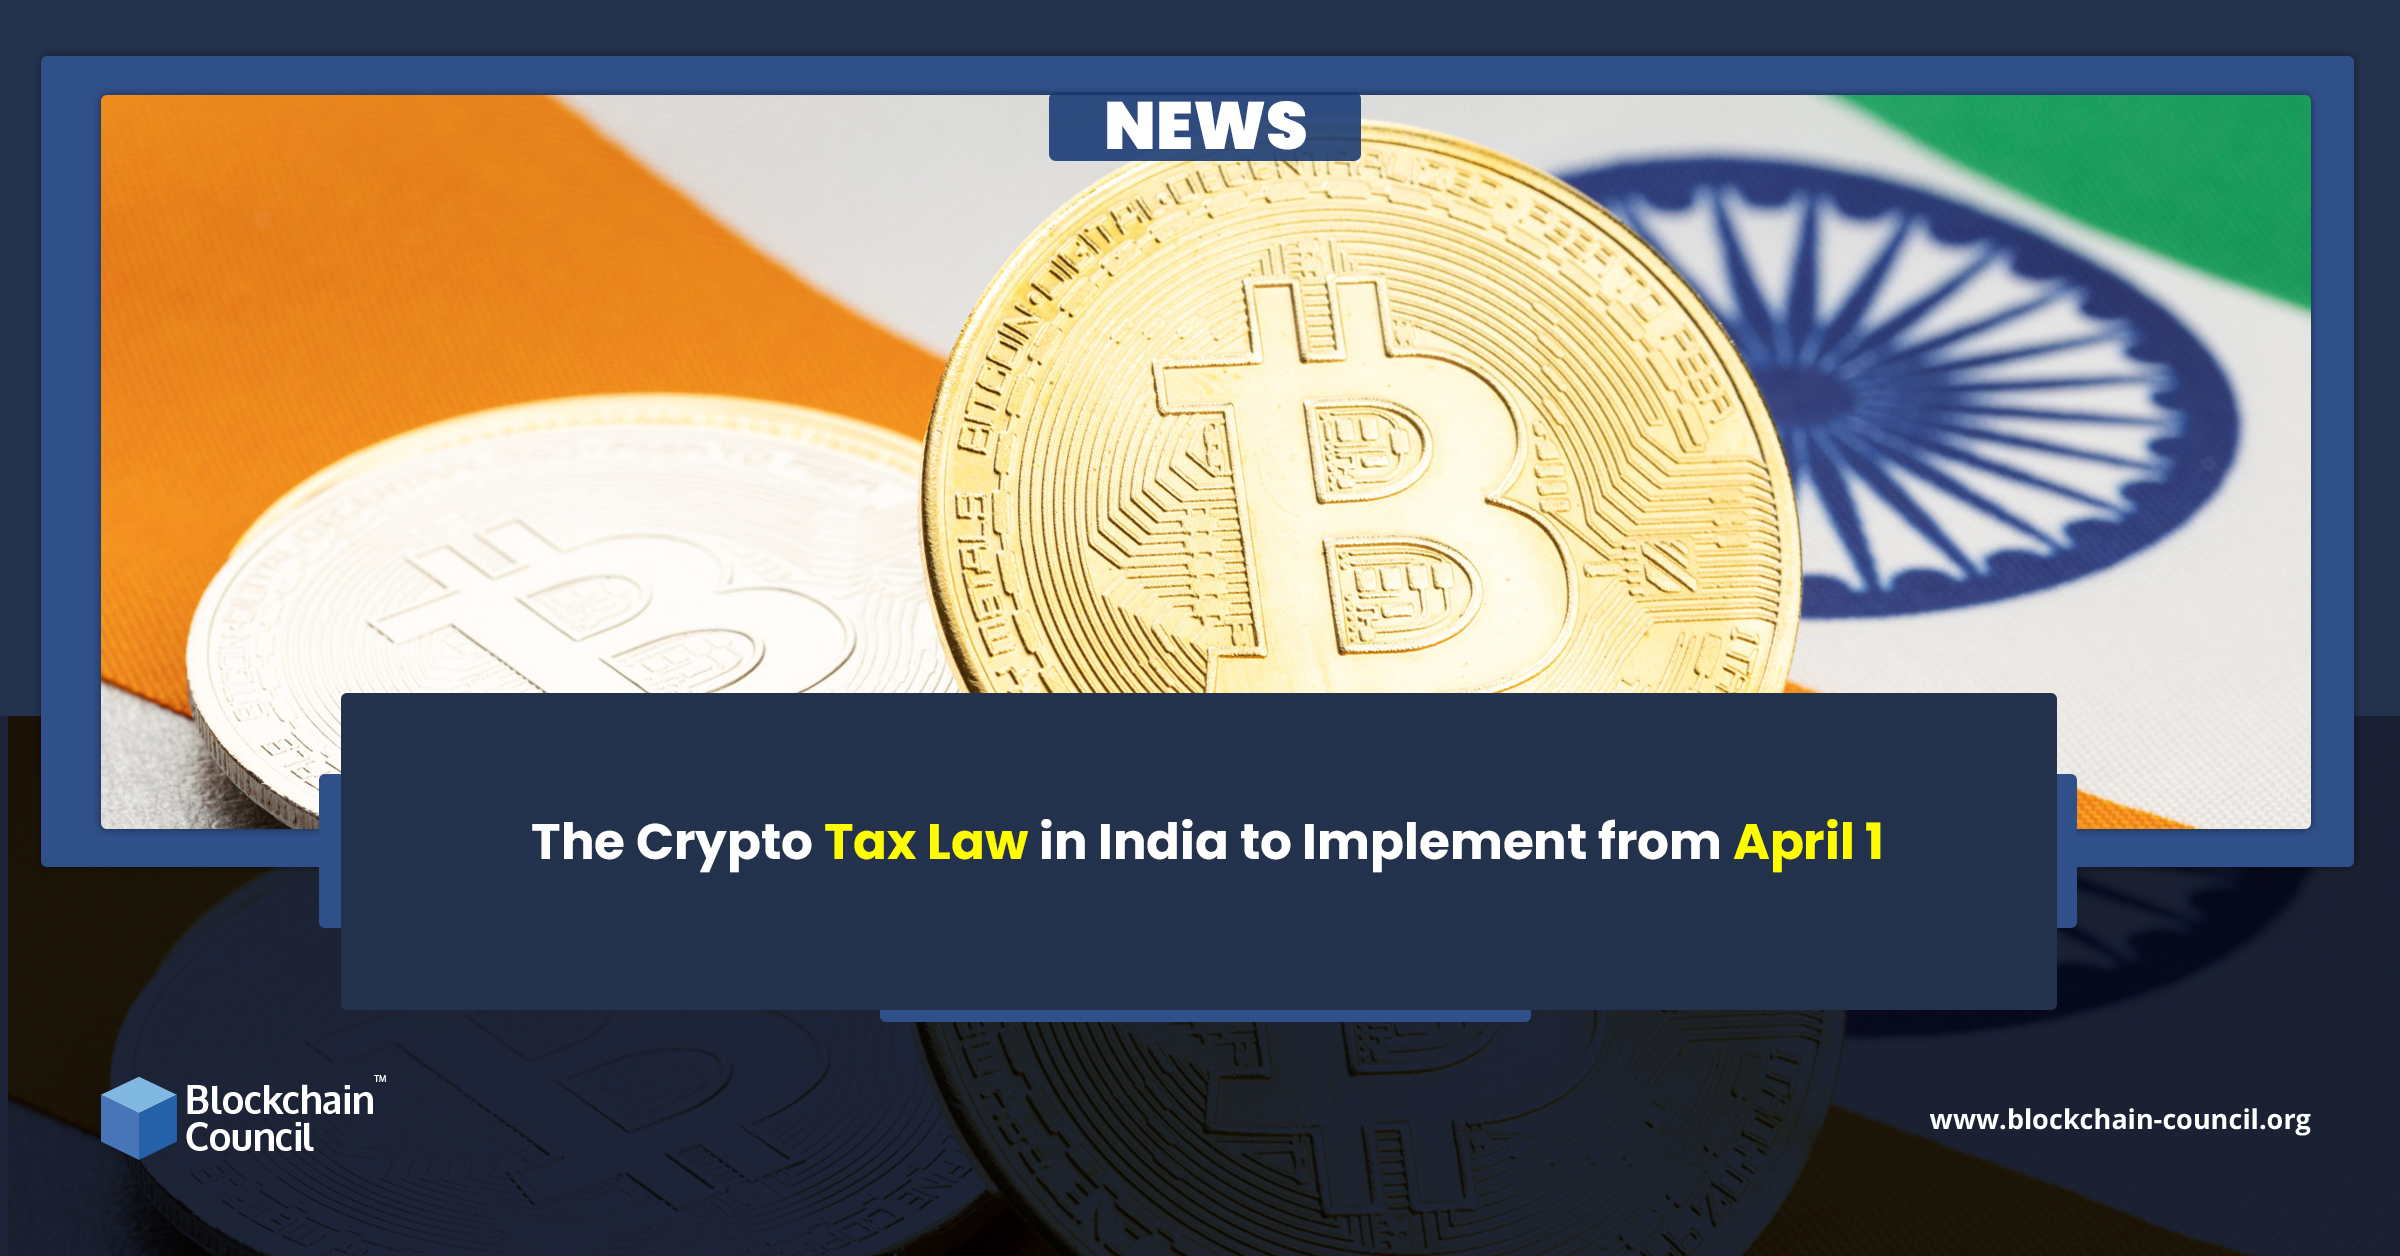 The Crypto Tax Law in India to Implement from April 1